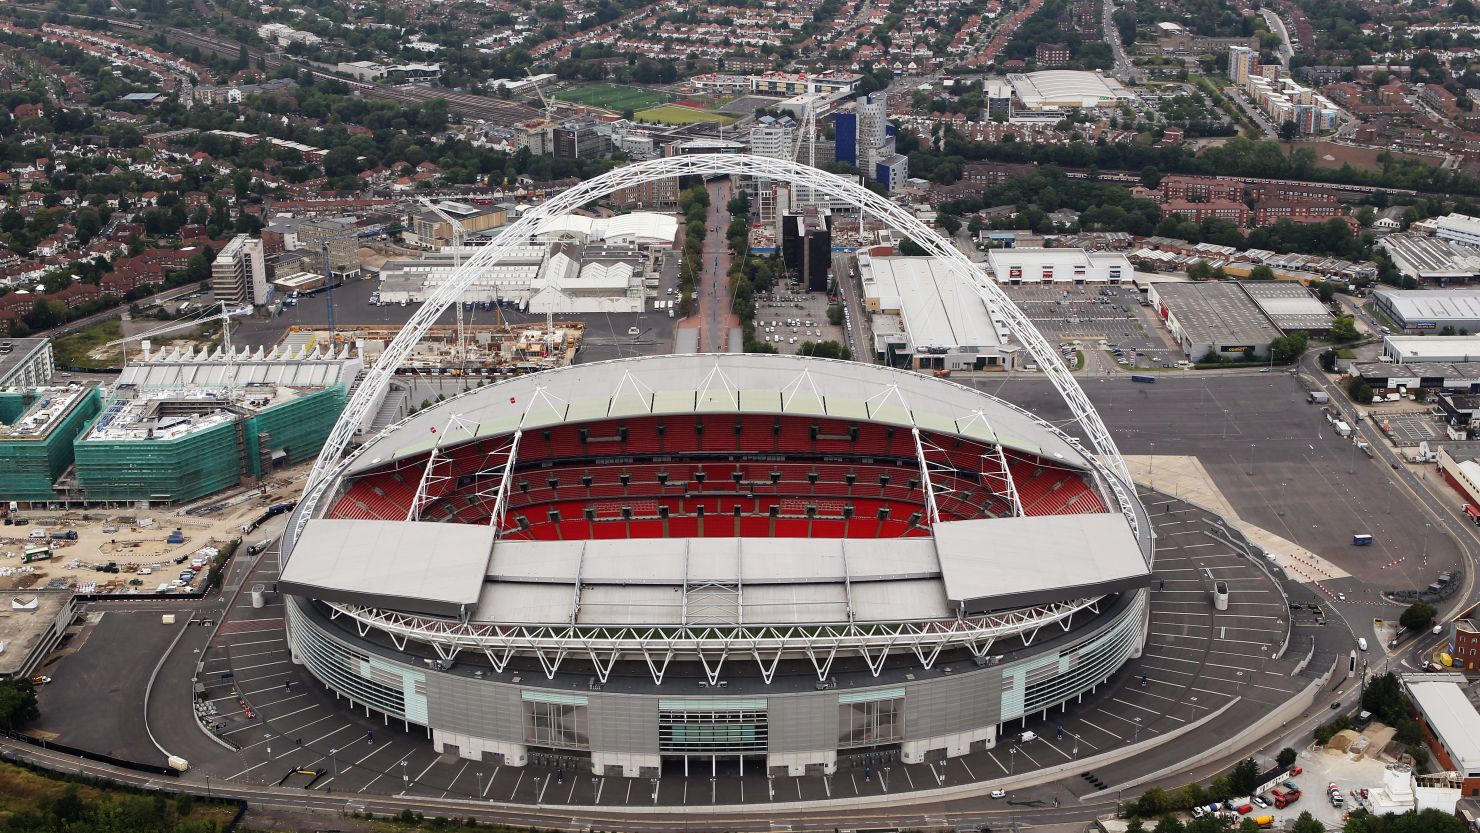 Wembley Stadium was re-opened in 2007 after it was completely rebuilt.